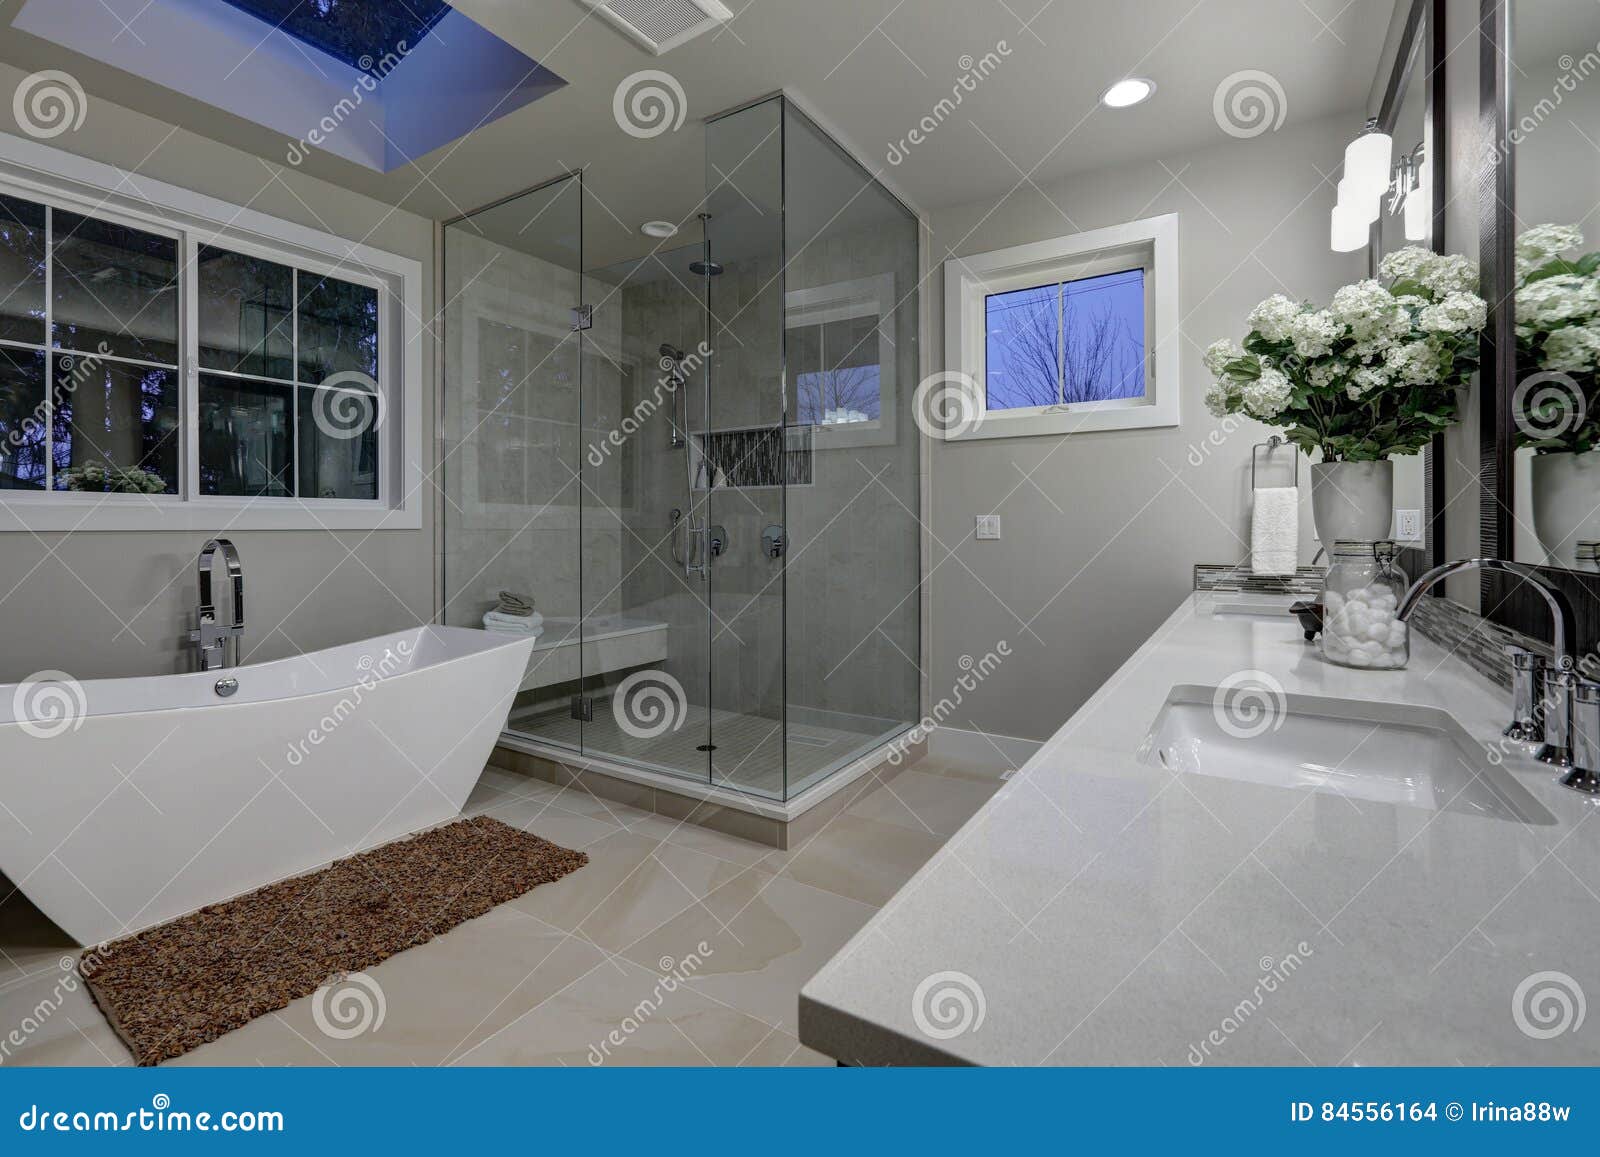 Amazing Master Bathroom With Large Glass Walk In Shower